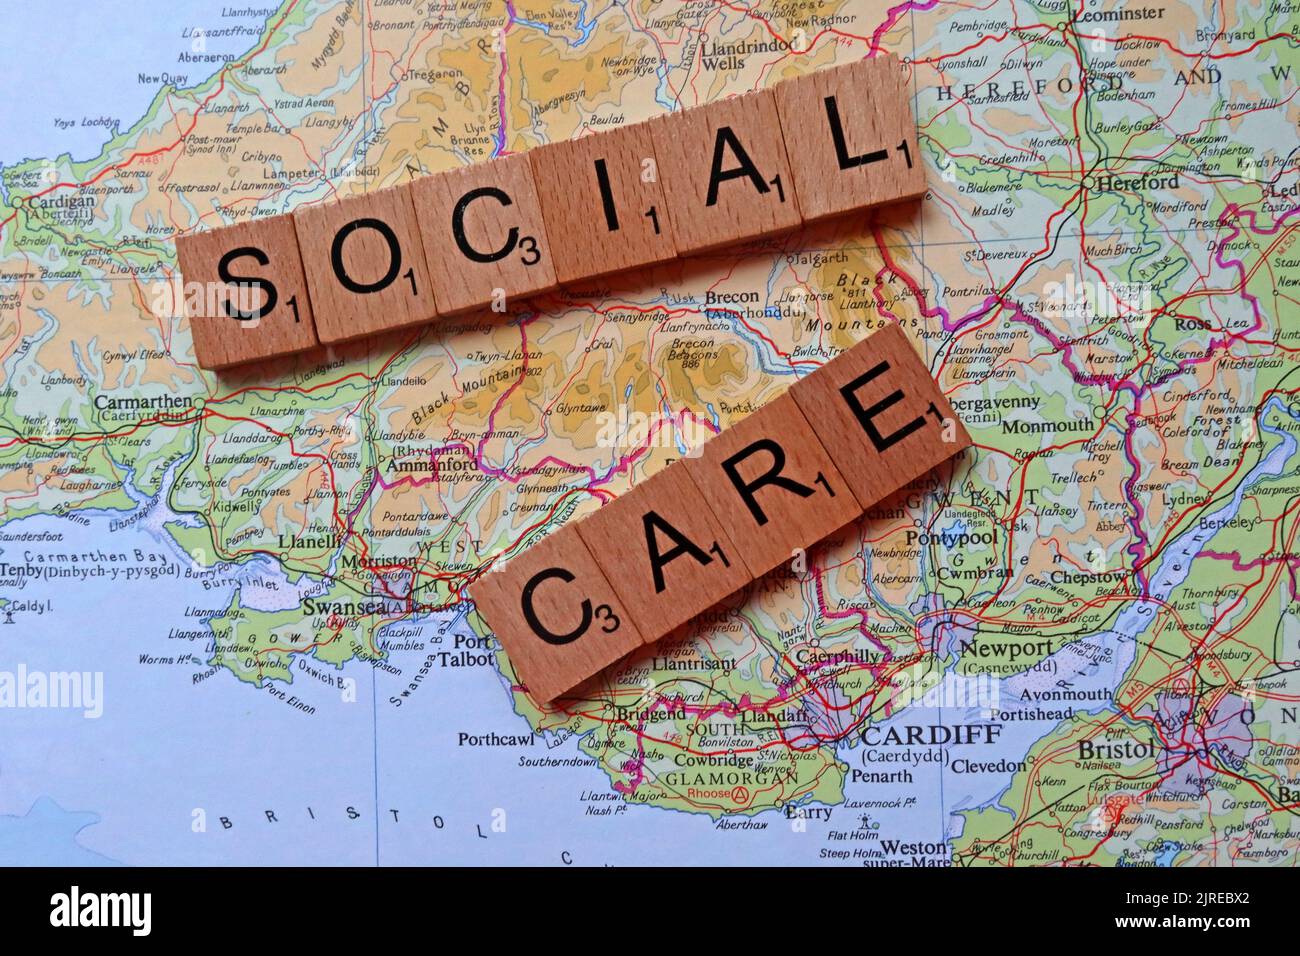 Health & social care in Wales, spelled out in letters, on map of Newport,Cardiff,Swansea,Barry,Bridgend Stock Photo